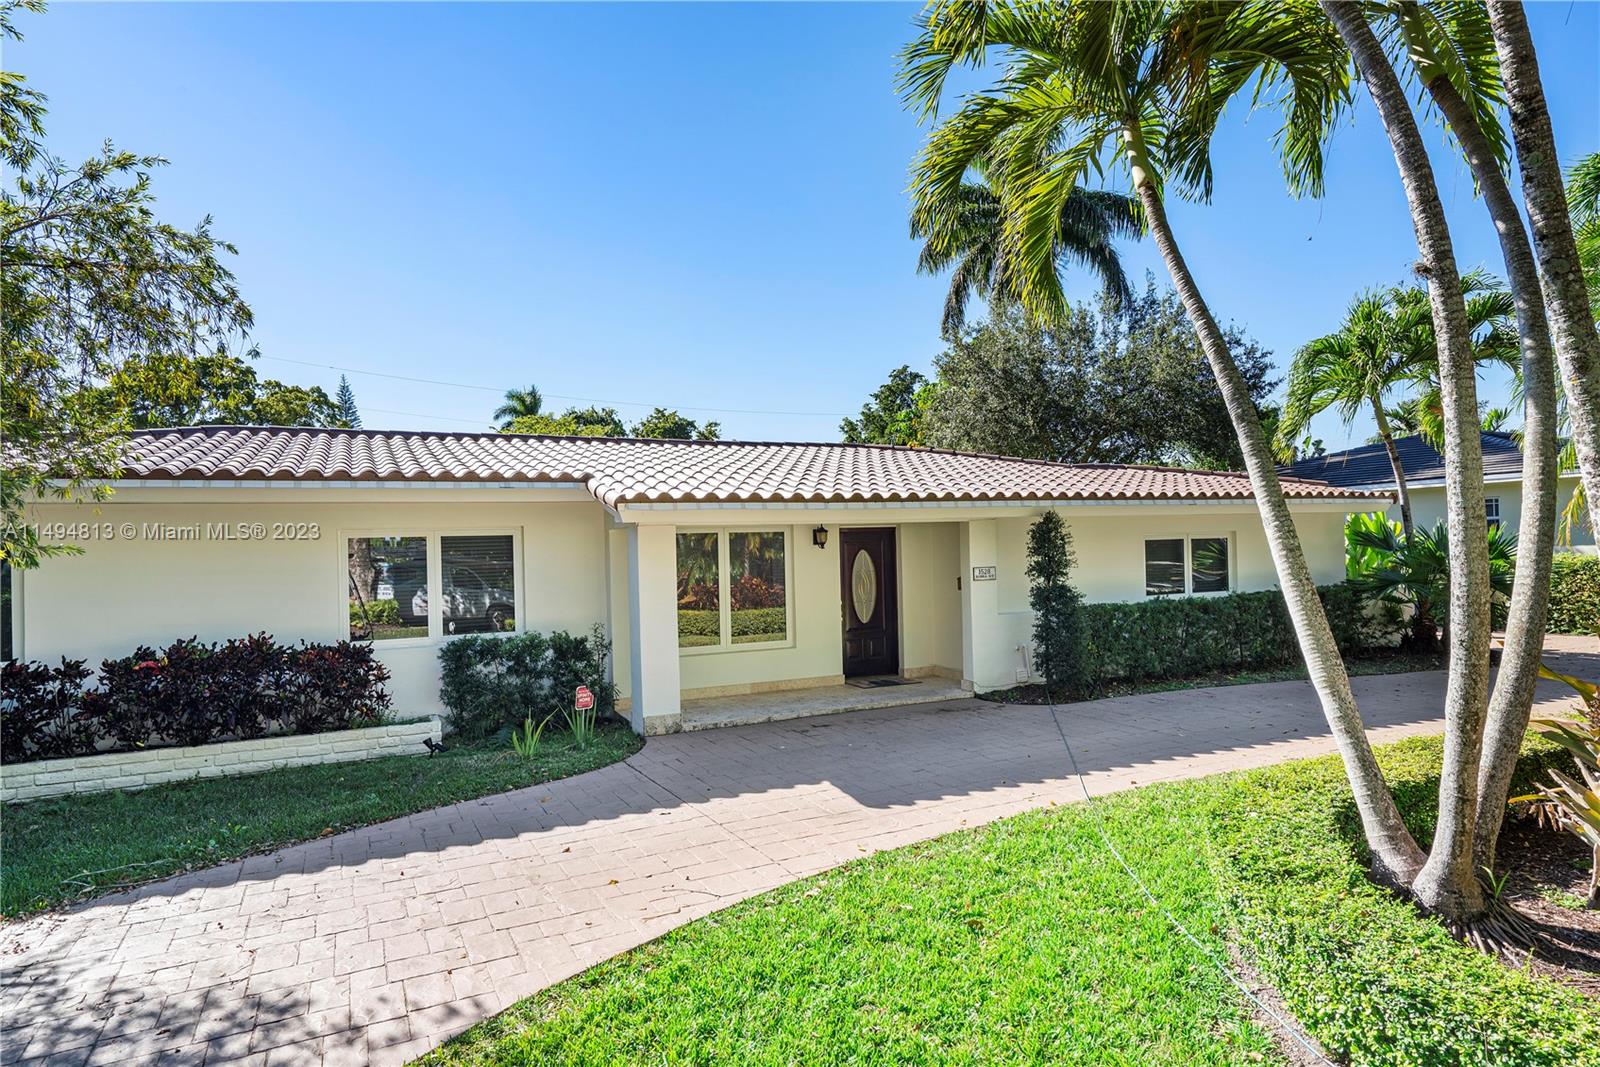 WALK INTO THIS STUNNING AND SPACIOUS RIVIERA HOME IN CORAL GABLES OF 2,253 SQ. FT. LIVING SPACE! FEATURING 4 BEDROOMS AND 3 BATHS. THIS HOUSE HAS BEAUTIFUL TRAVERTINE MARBLE FLOORS THROUGHOUT, MULTIPLE EXPOSURES OPEN LAYOUTS, A MODERN KITCHEN WITH QUARTZ COUNTERTOPS, STAINLESS STEEL APPLIANCES AND TWO BREAKFAST COUNTERS THAT OVERLOOK AN AMPLE AND SUNNY DINING AREA! YOU WILL ALSO FALL IN LOVE WITH THE GREAT ROOM WITH ITS VAULTED CEILINGS AND ITS POOL VIEW! ALL WINDOWS ARE HURRICANE IMPACT AND THE POOL (SALTED) WAS RENOVATED. AMAZING LOCATION WITH AN URBAN-SUBURBAN MIX FEELING. WALKING DISTANCE FROM UNIVERSITY OF MIAMI.   Notice required.